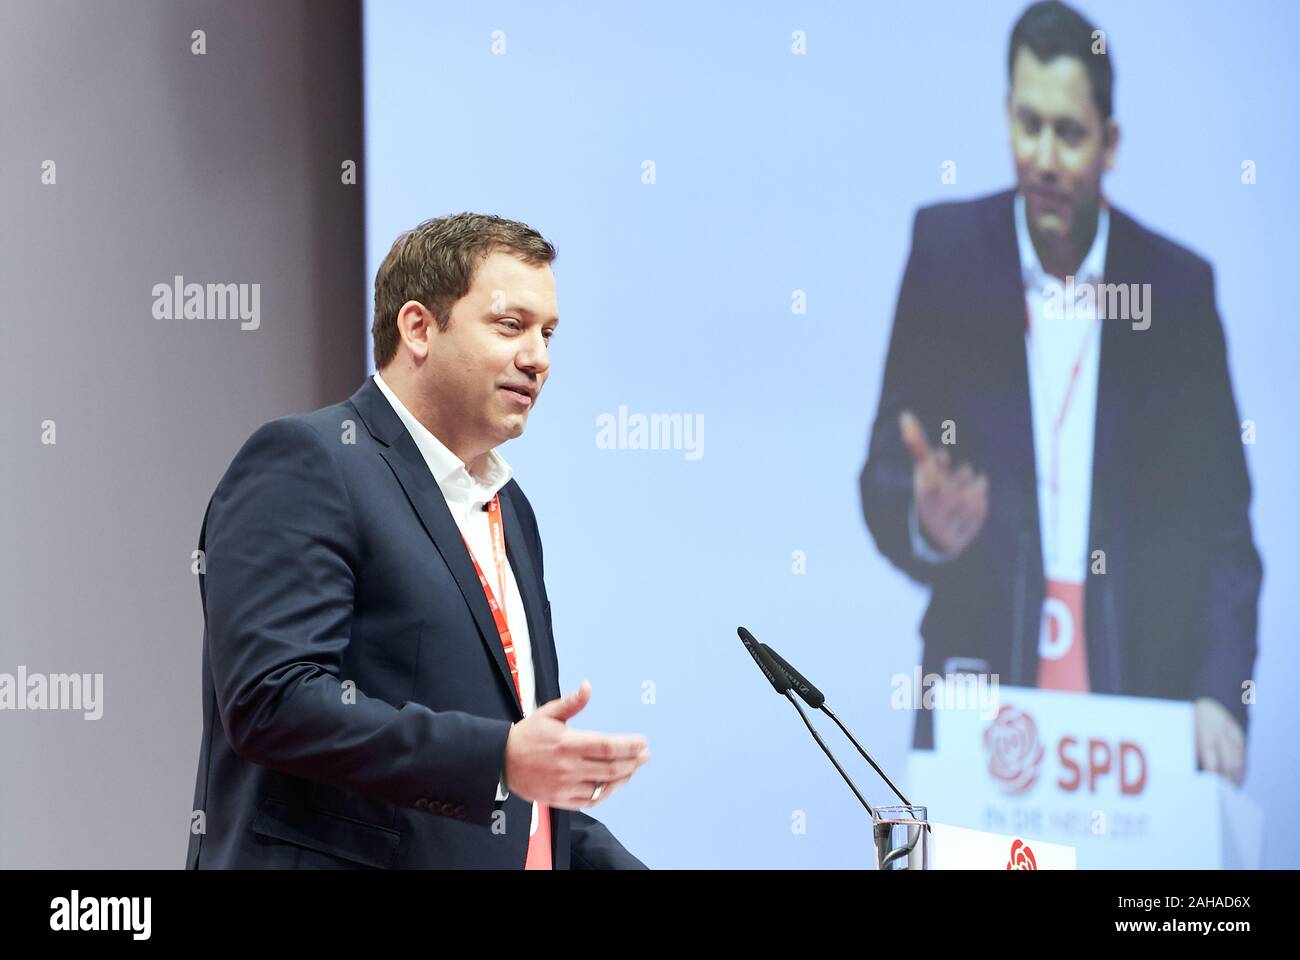 06.12.2019, Berlin, Berlin, Germany - Lars Klingbeil, secretary general of the SPD, on the podium with his speech at the opening of the federal party Stock Photo